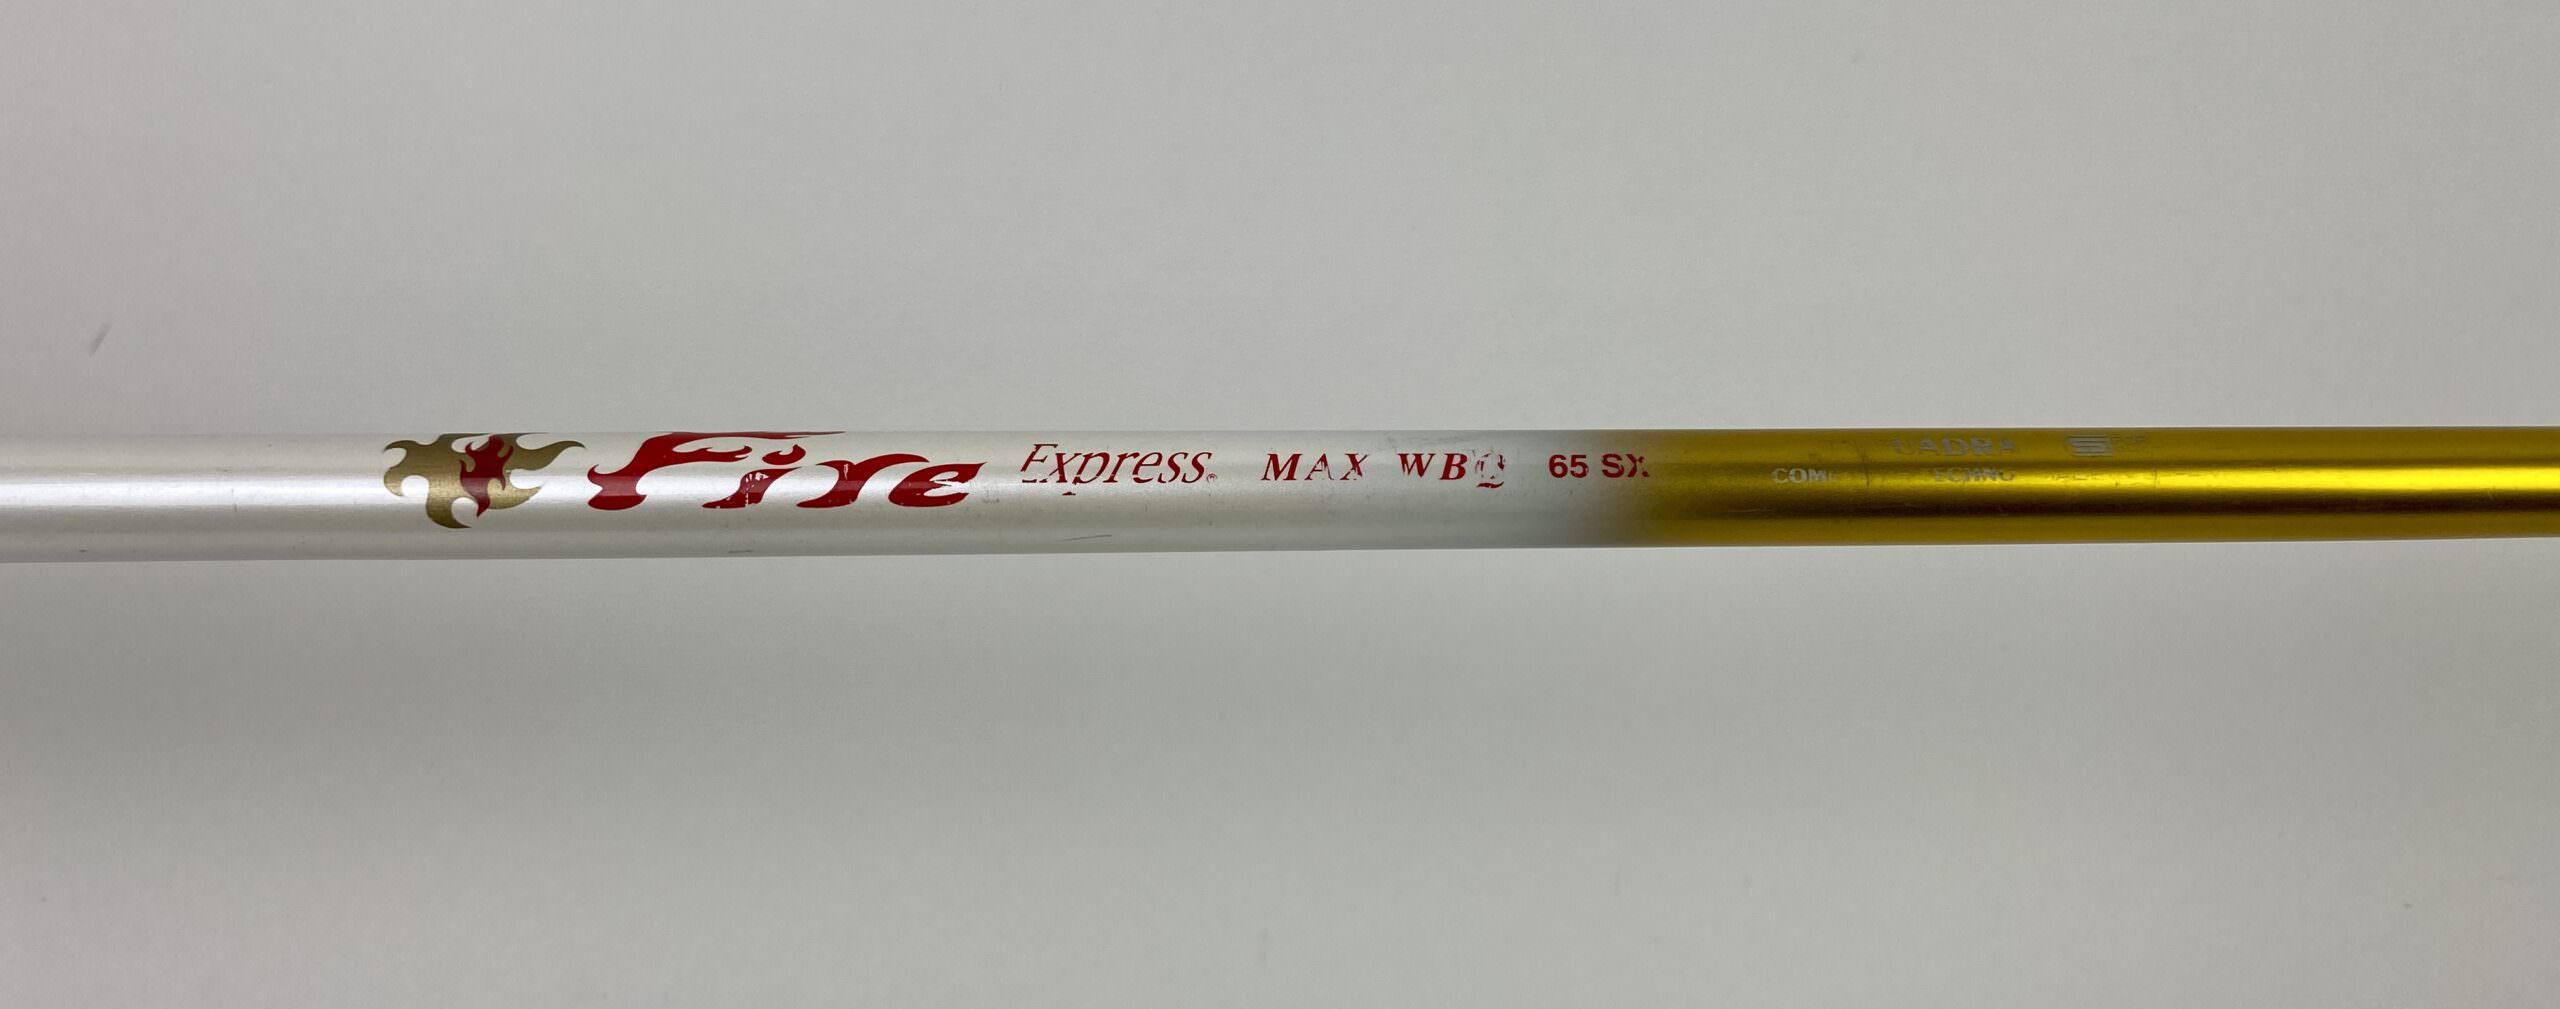 Golf Shaft Only Composite Techno Fire Express Max WBQ 65 (SX) 44inch JAPAN  · SwingPoint Golf®